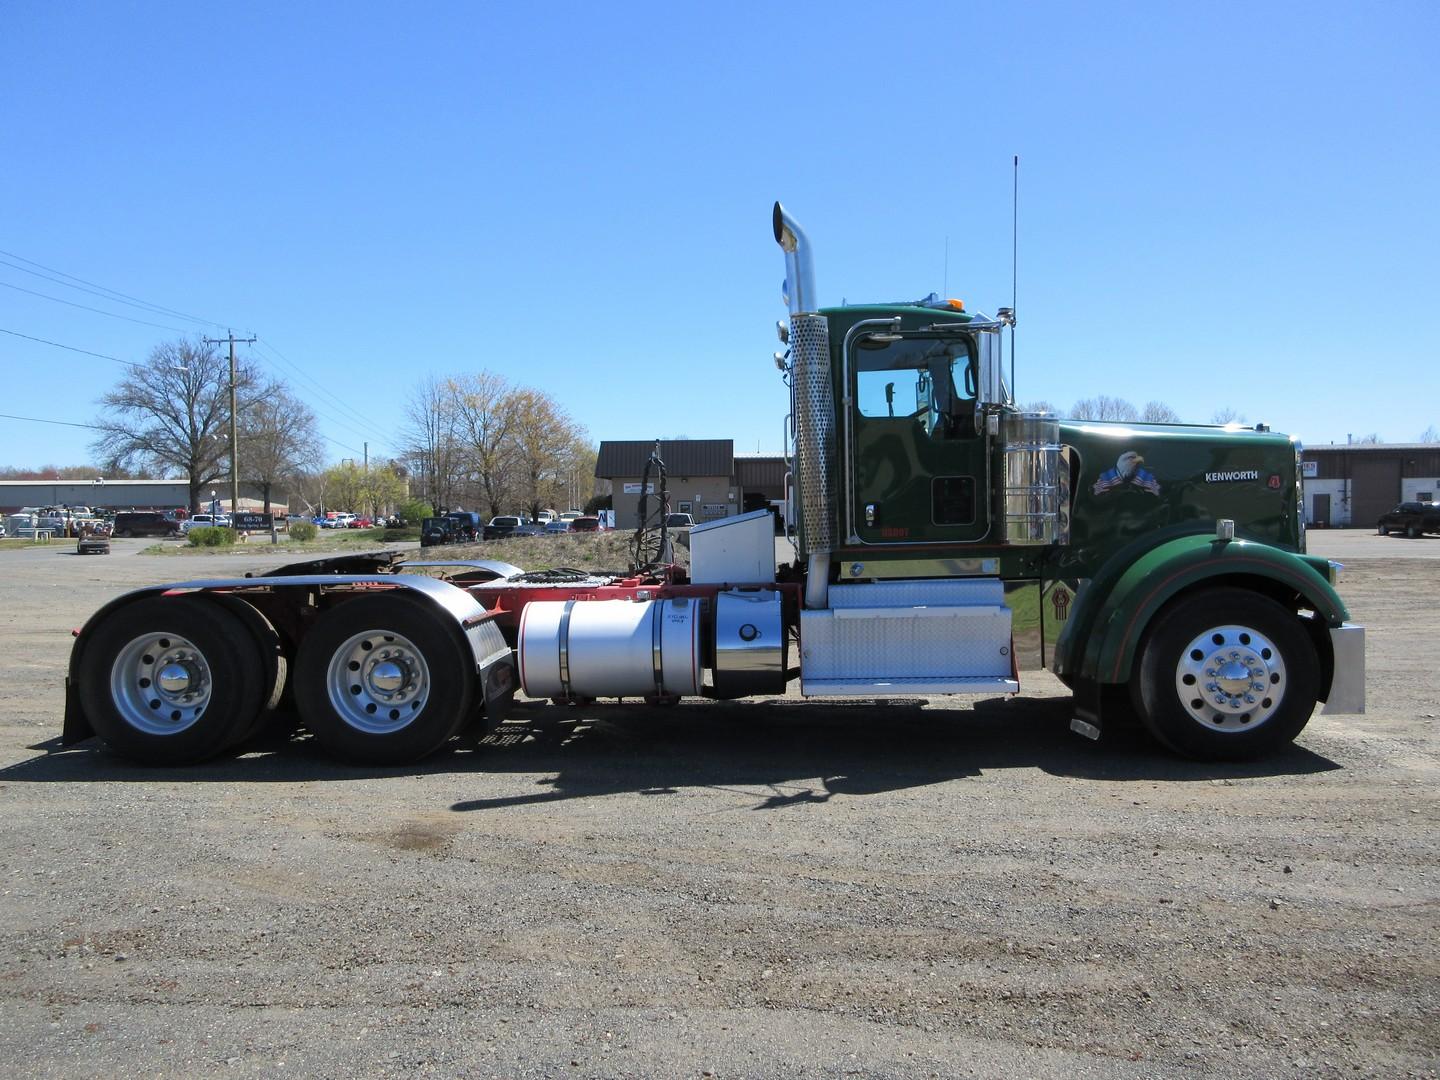 2014 Kenworth W900 T/A Tractor